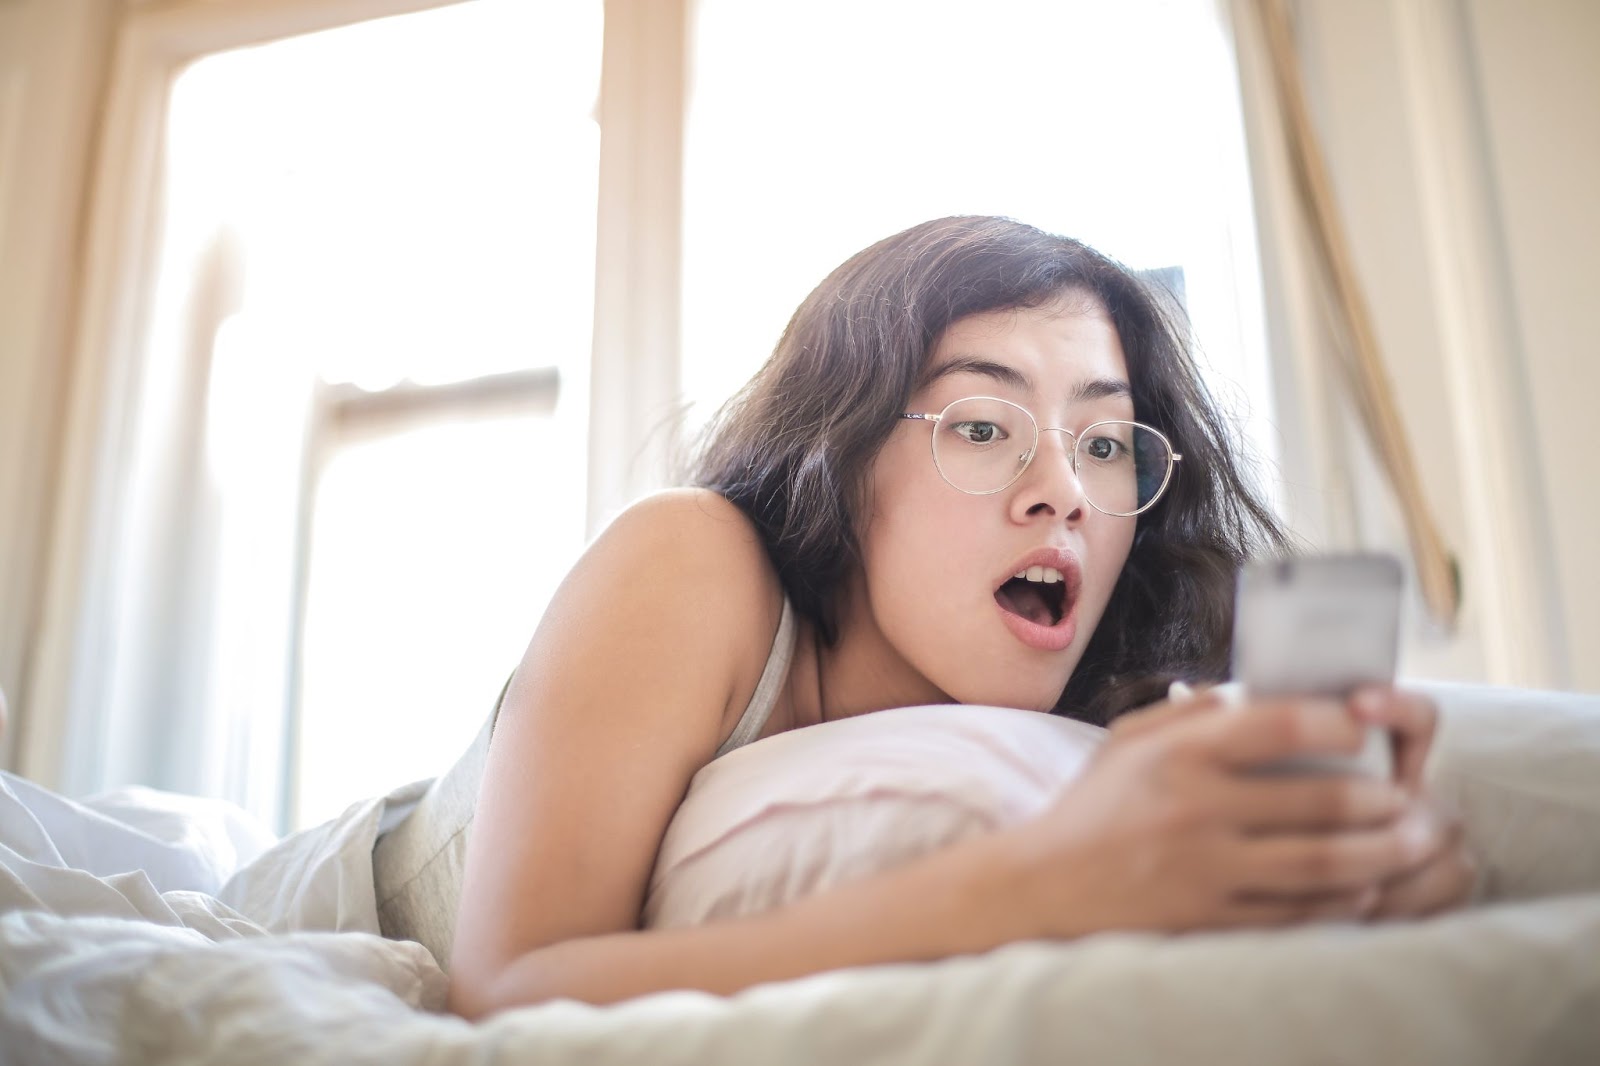 Native Advertising uses curiosity and a shock effect to entice you to click 
https://www.pexels.com/photo/woman-lying-on-bed-holding-smartphone-3807535/